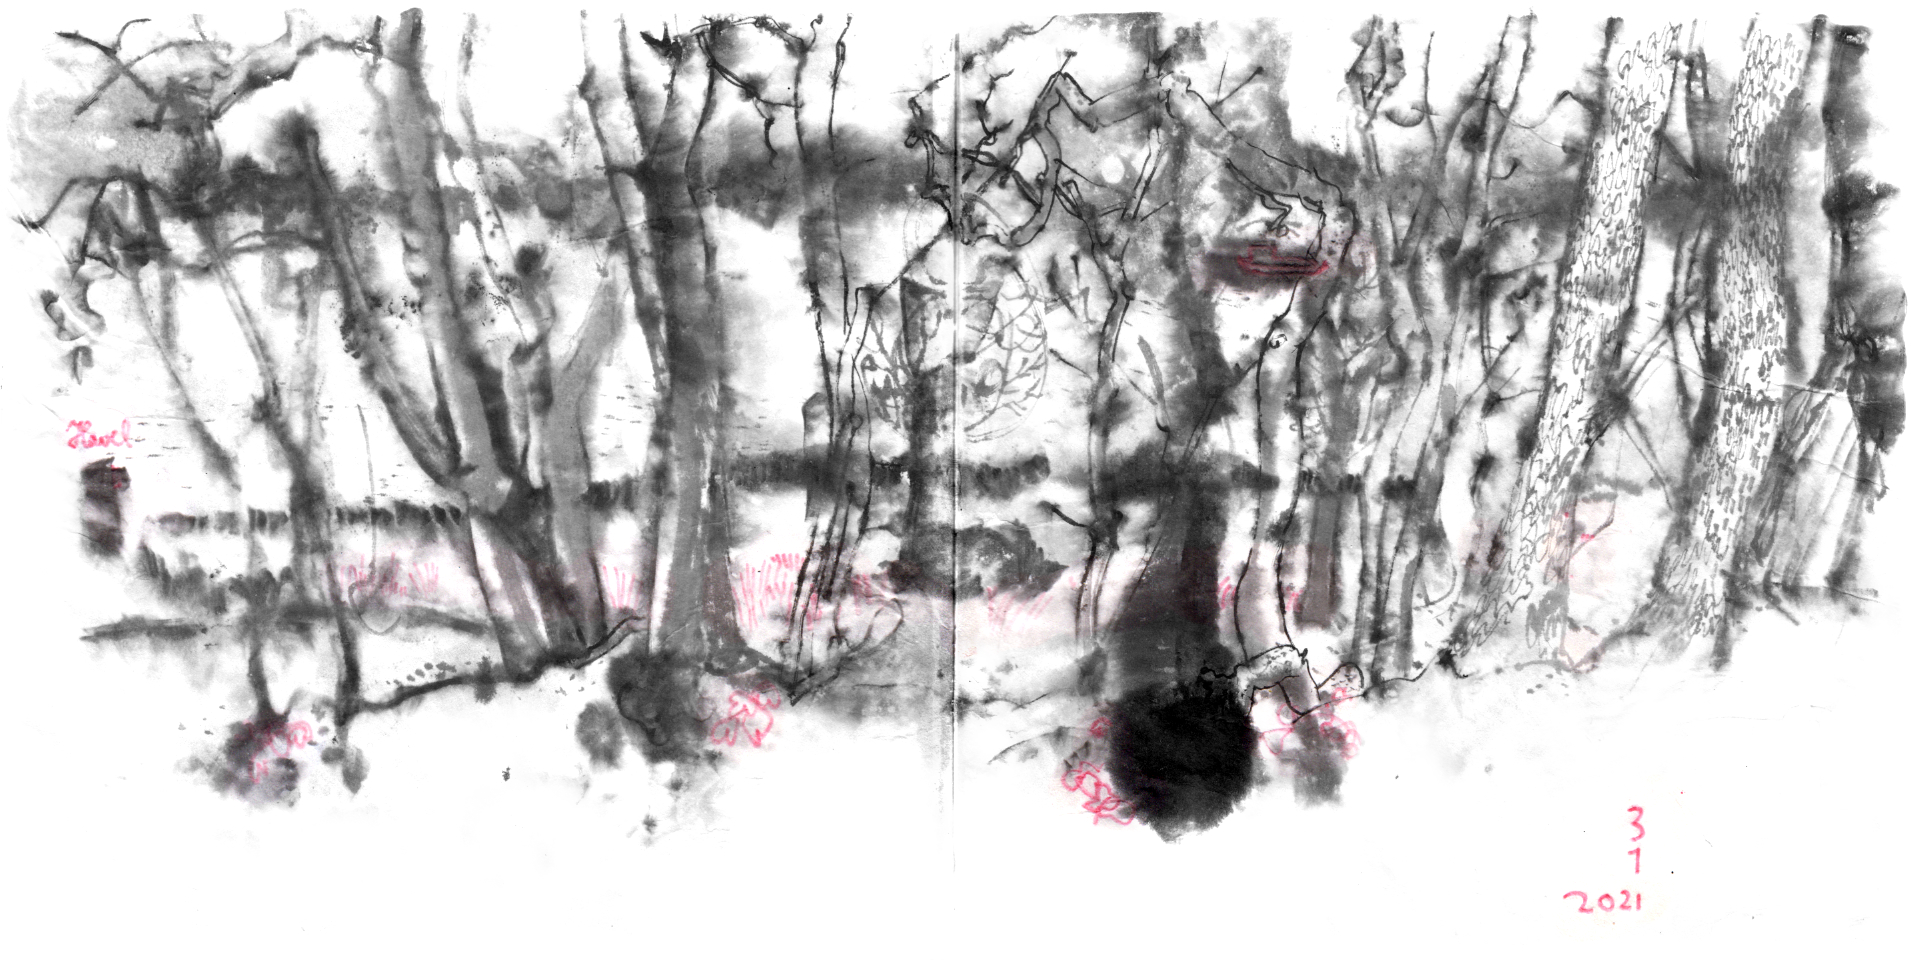 Inkdrawing of an light winter forest in front of a lake. Ink wasdeluted by snowflakes, melting on the sheet, creating a blurry effect. Some structure is added with a red crayon,